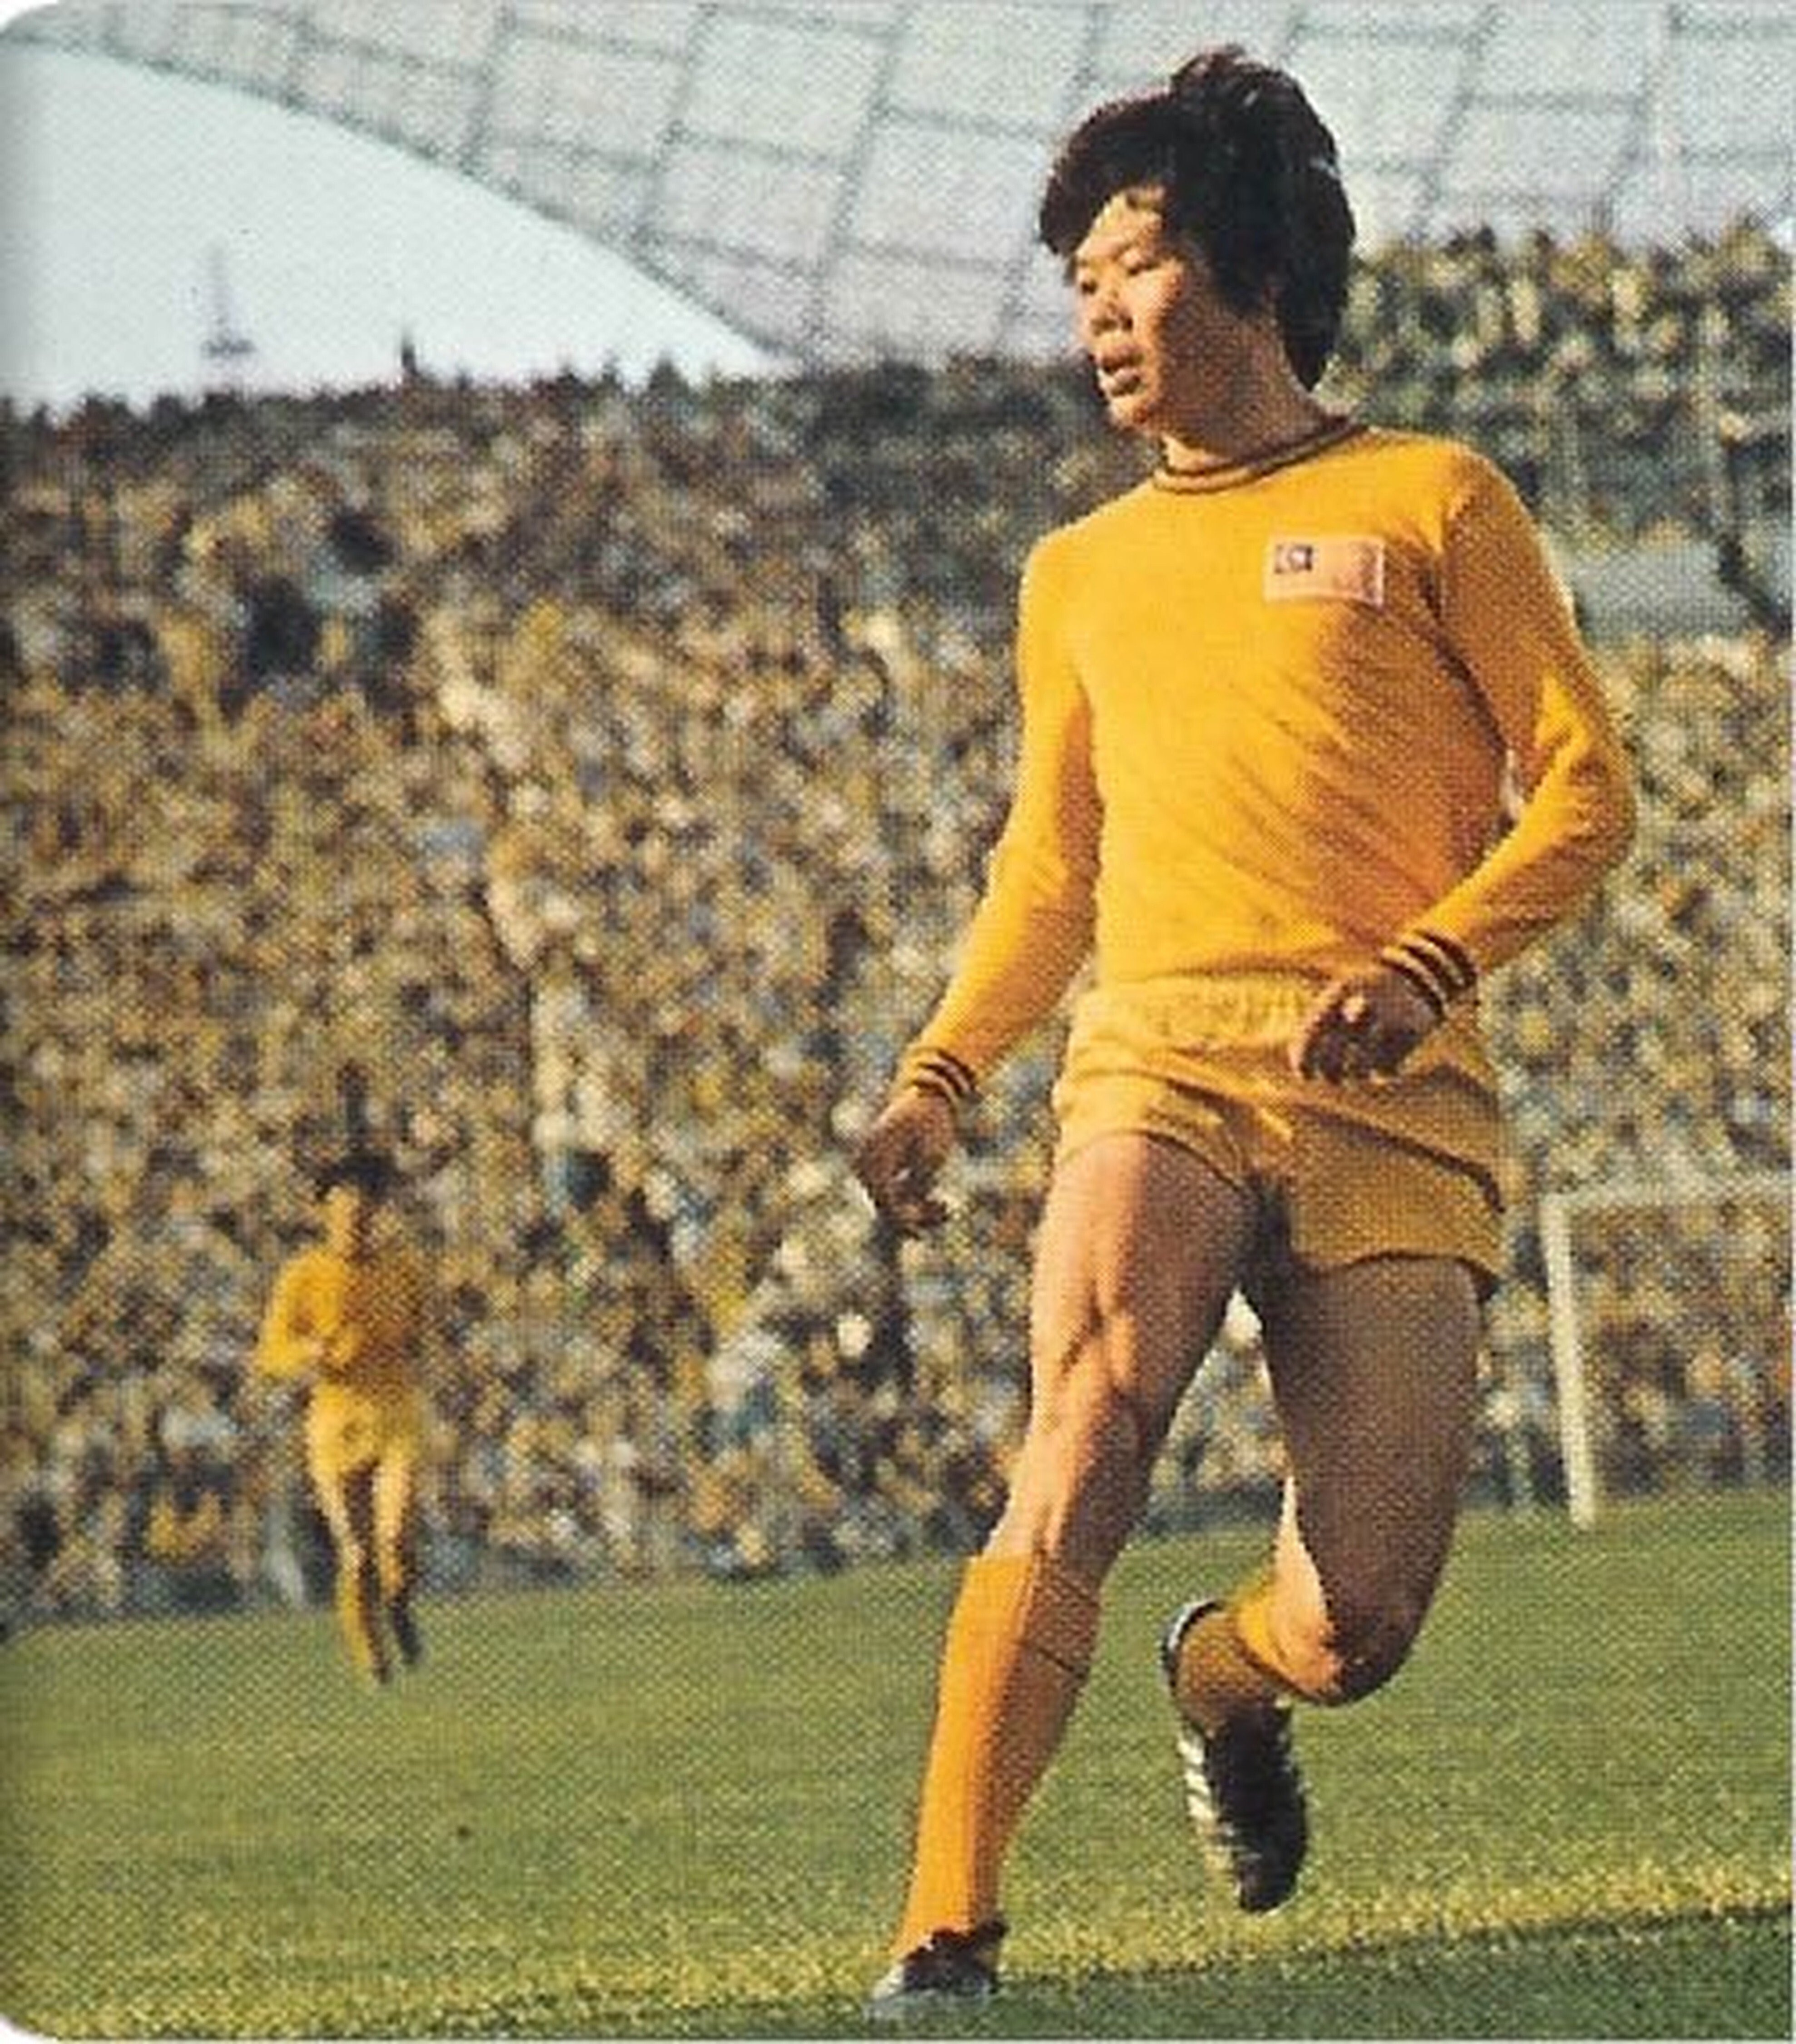 Malaysian footballer Soh Chin Ann has 195 recognised international appearances. Photo: Twitter